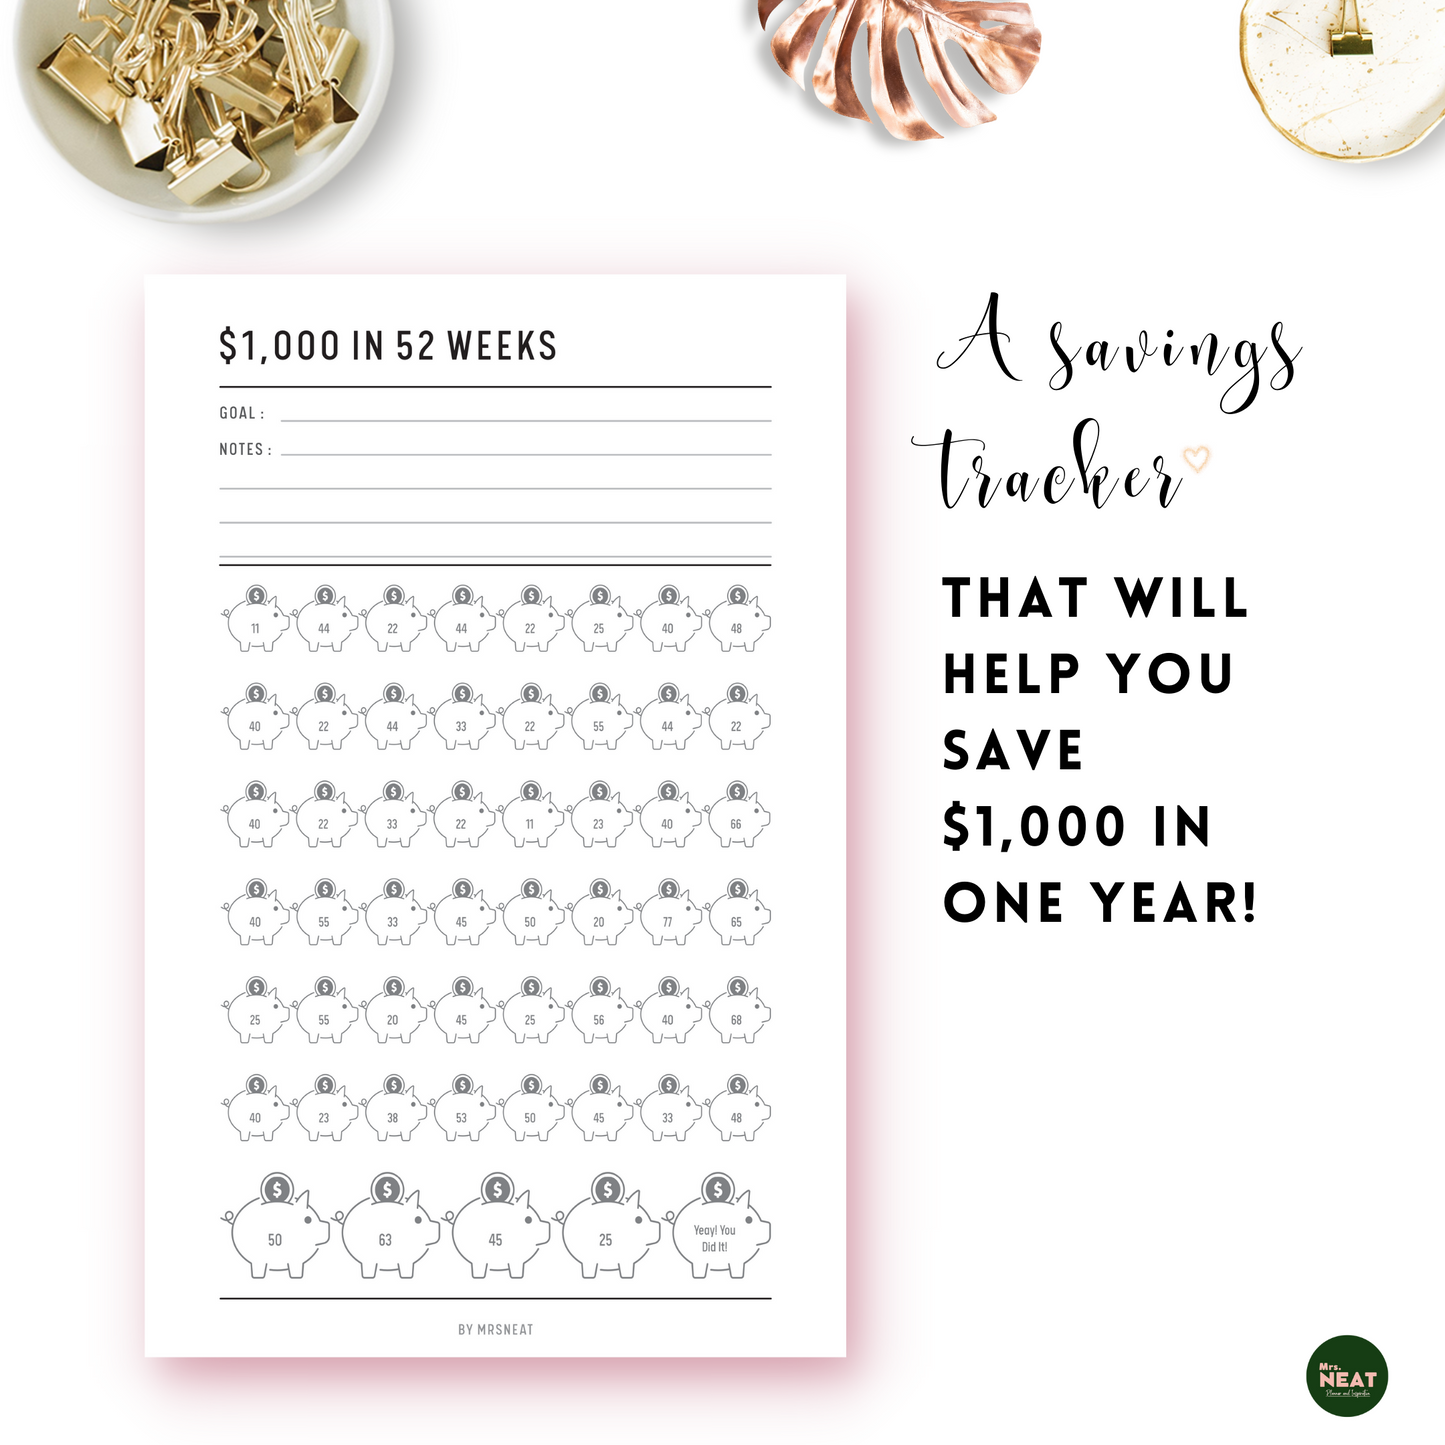 A Saving Tracker that will help you save $1000 in one year